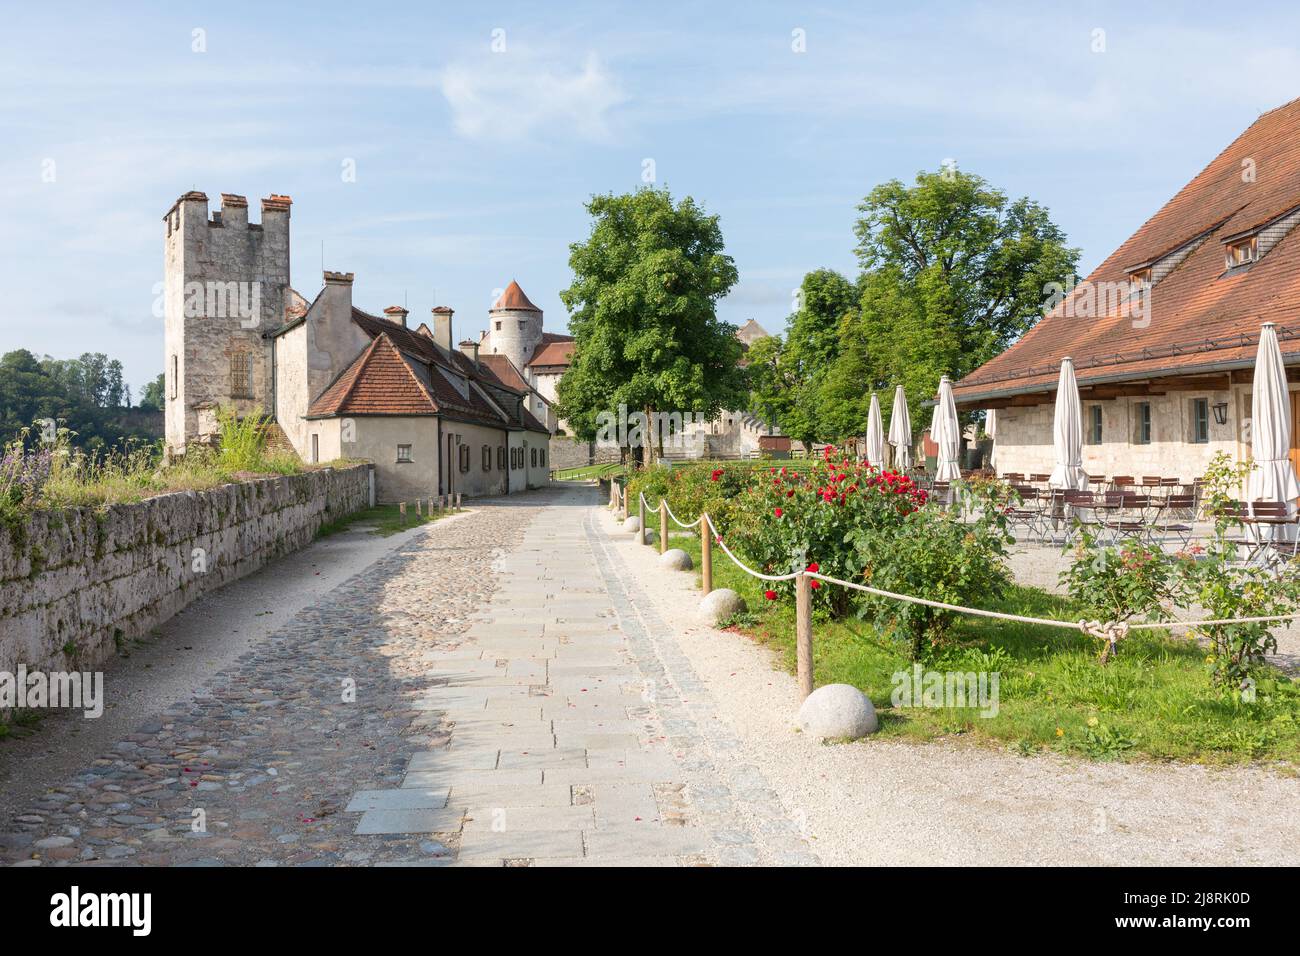 Burghausen, Germany - Jul 25, 2021: View along a path inside the walls of Burghausen castle. On the right the castle cafe. Stock Photo